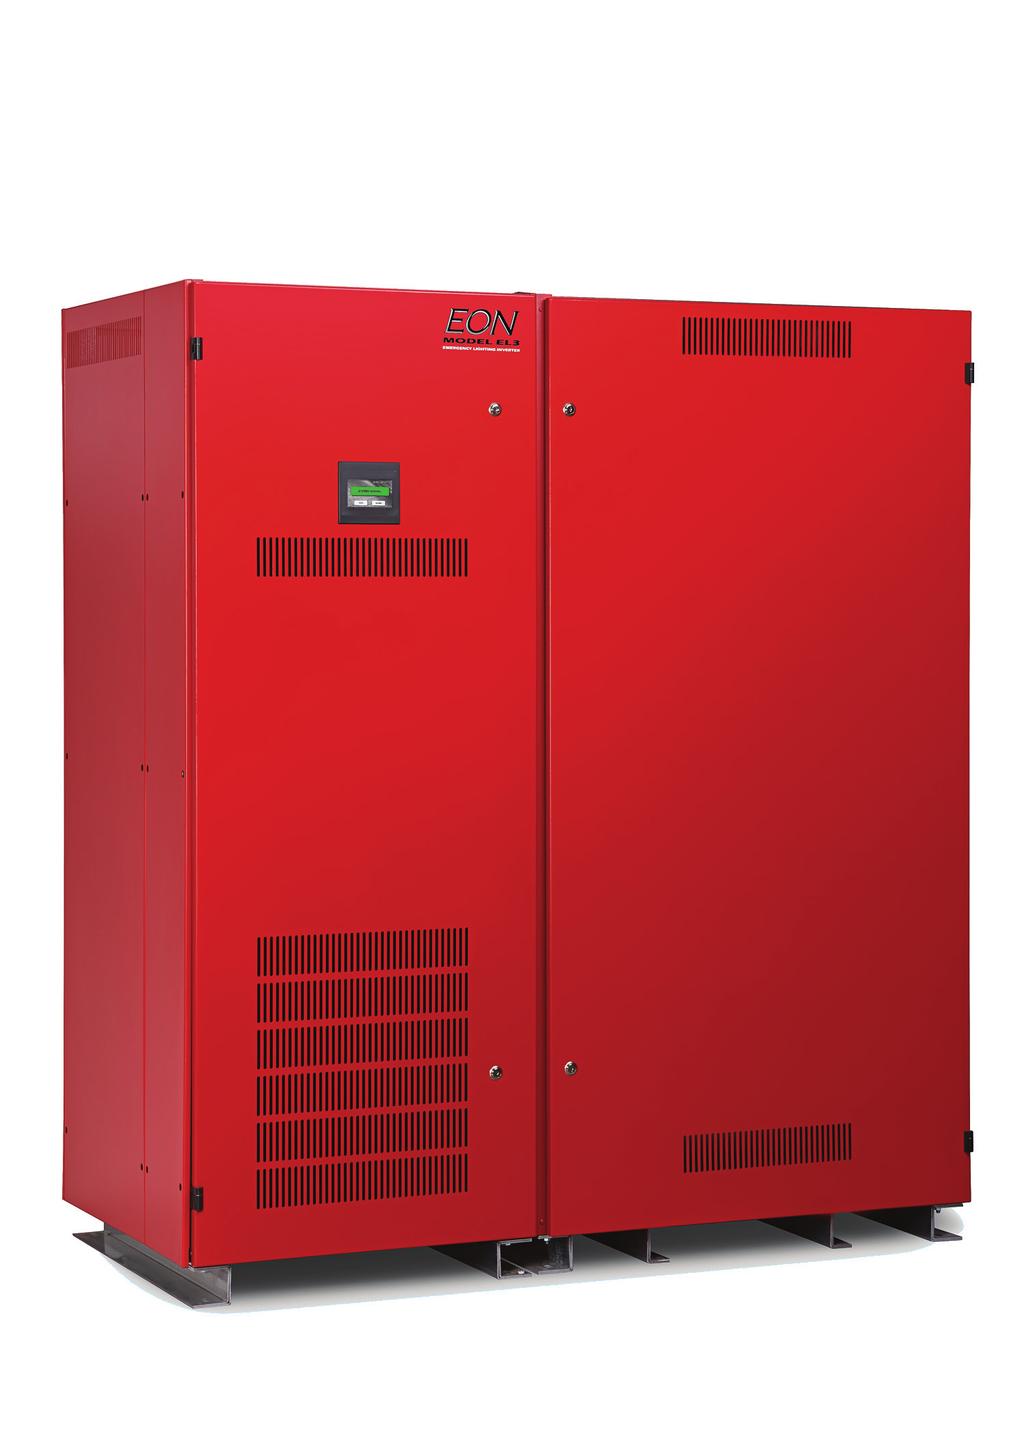 10 kw - 55 kw THREE PHASE EON TM MODEL EL3 Centralized Emergency Lighting Inverters Featuring one of the smallest three phase cabinet footprints in the industry!